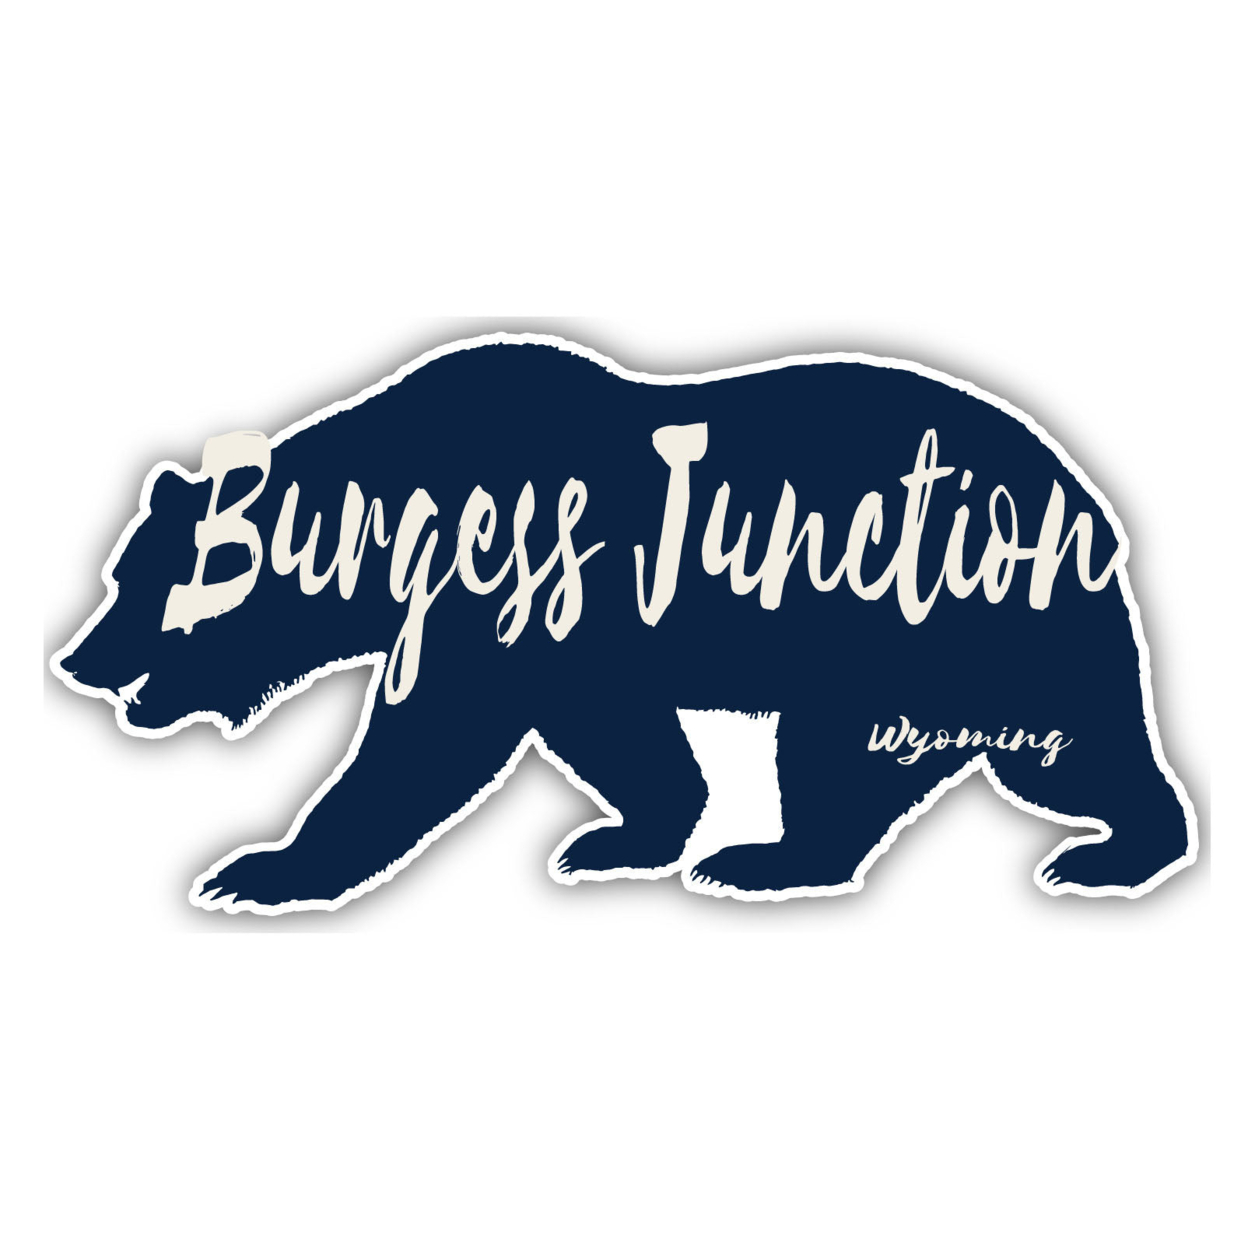 Burgess Junction Wyoming Souvenir Decorative Stickers (Choose Theme And Size) - Single Unit, 8-Inch, Bear